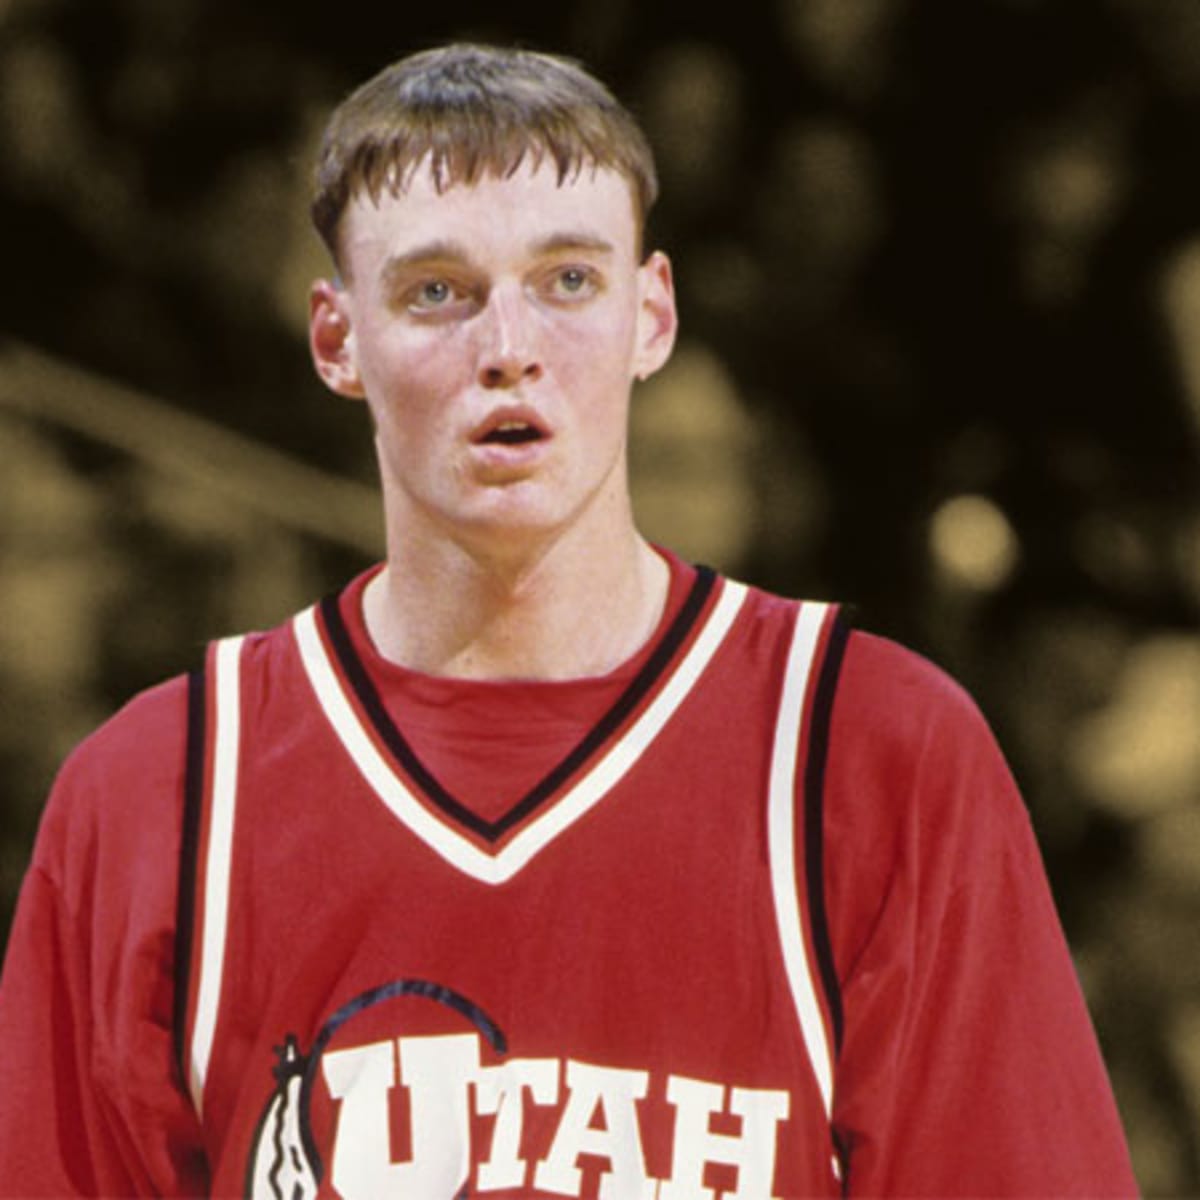 Life after the NBA: Keith Van Horn never reached his star potential, but  he's prospering in his post-NBA career - NetsDaily